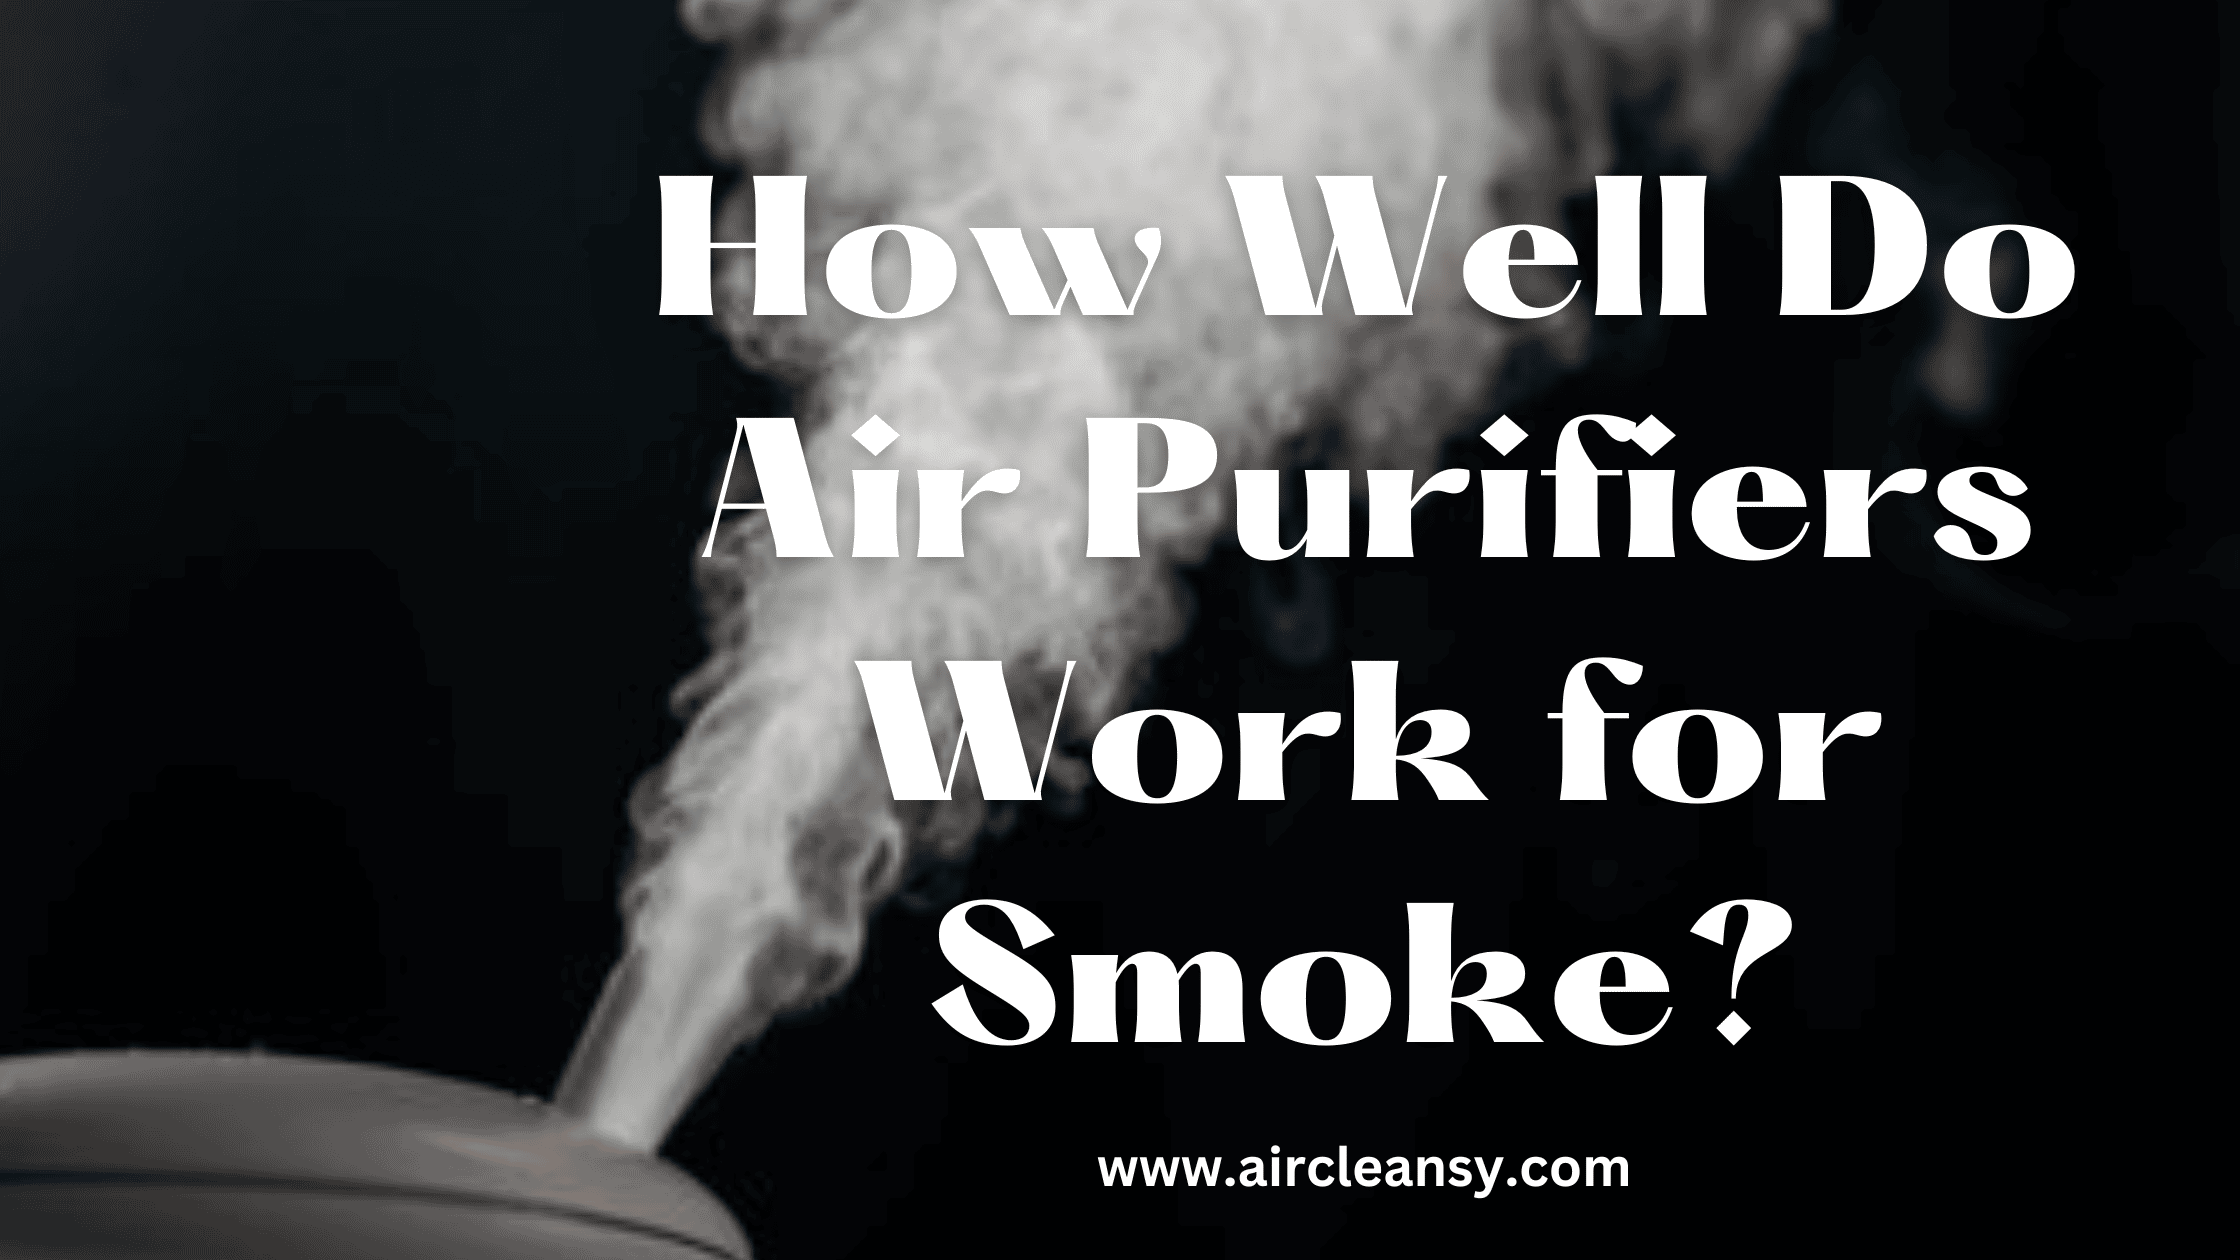 How Well Do Air Purifiers Work for Smoke